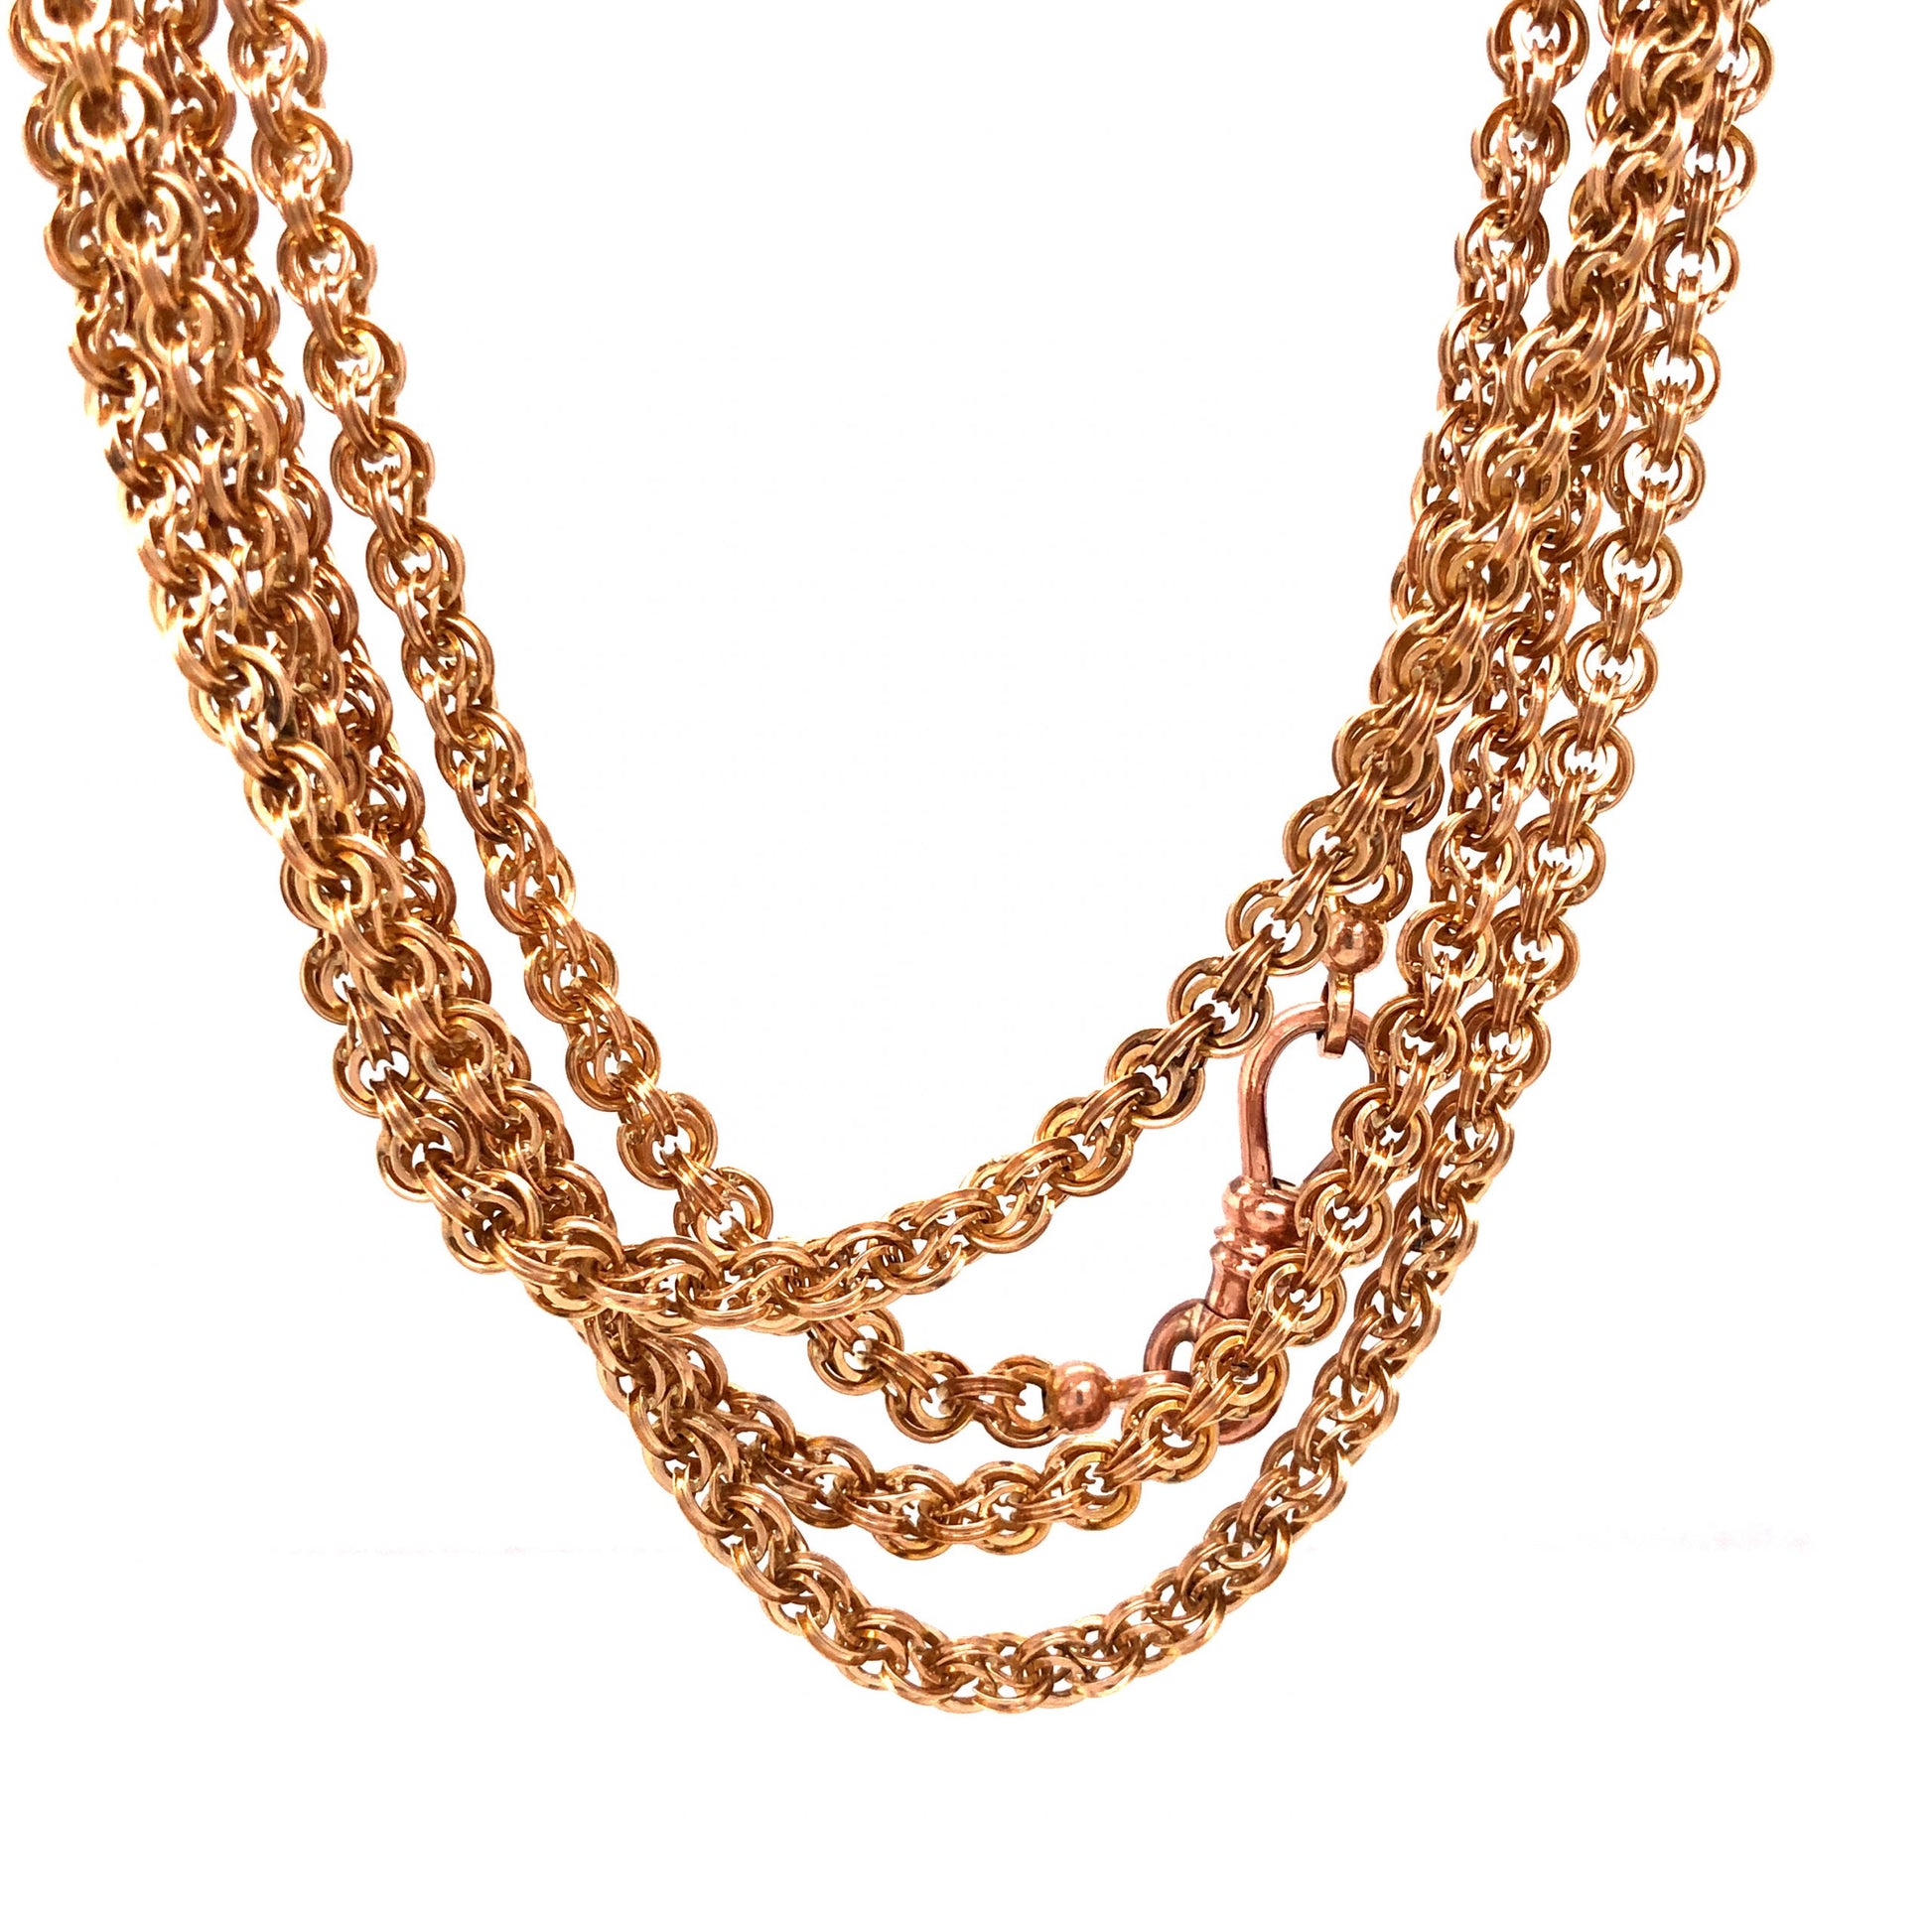 1880's Victorian Muffler Chain Necklace in 14k Yellow GoldComposition: 14 Karat Yellow Gold Total Gram Weight: 54.9 g Inscription: 14
      